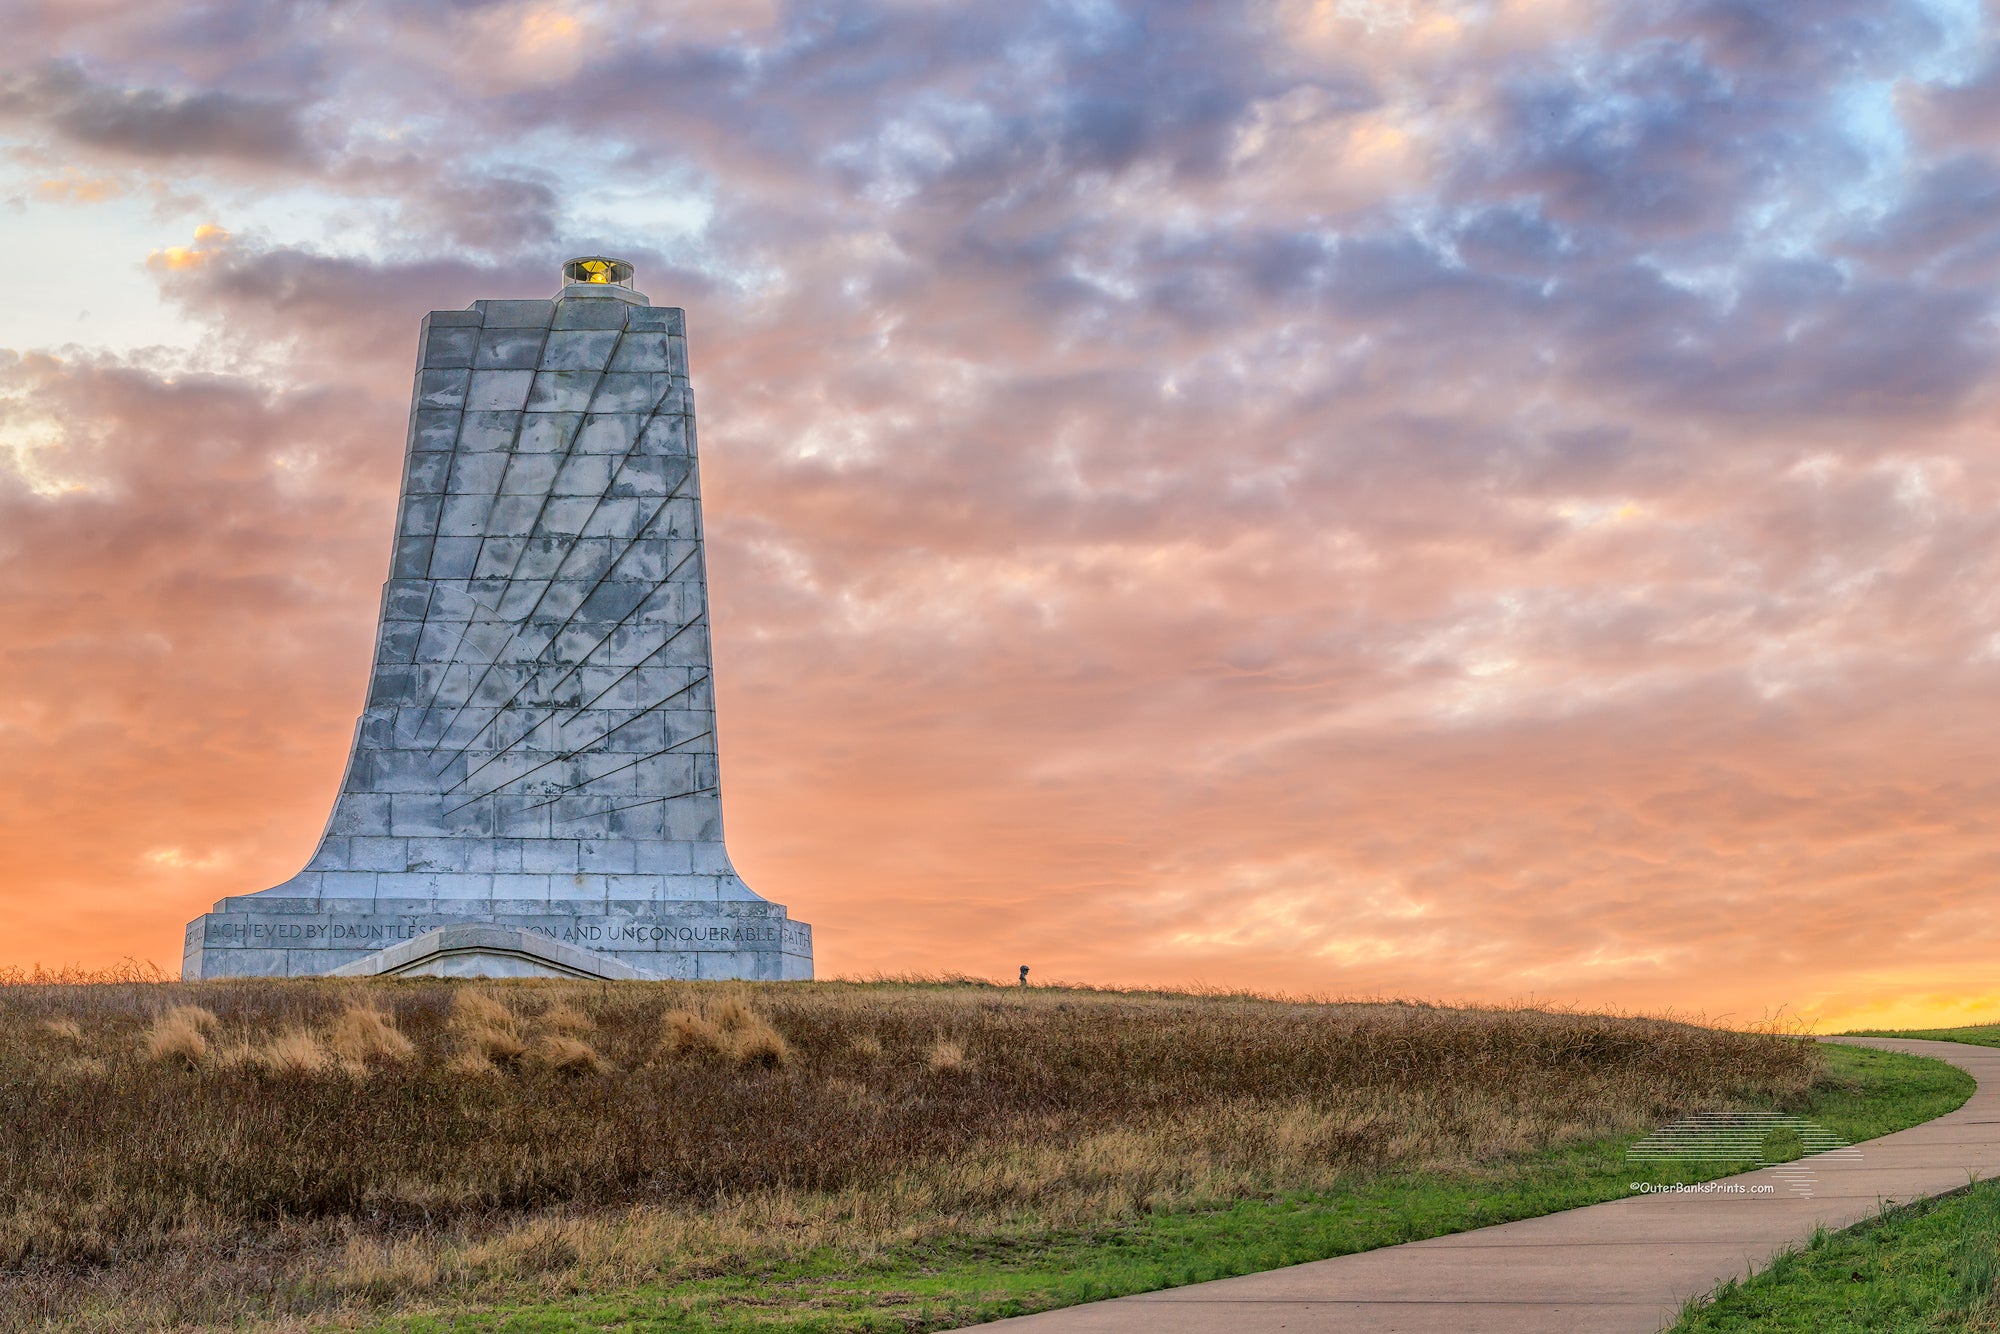 Sunrise cloudy sky create a backdrop behind the Wright Brothers Memorial in Kill Devil Hills North Carolina.